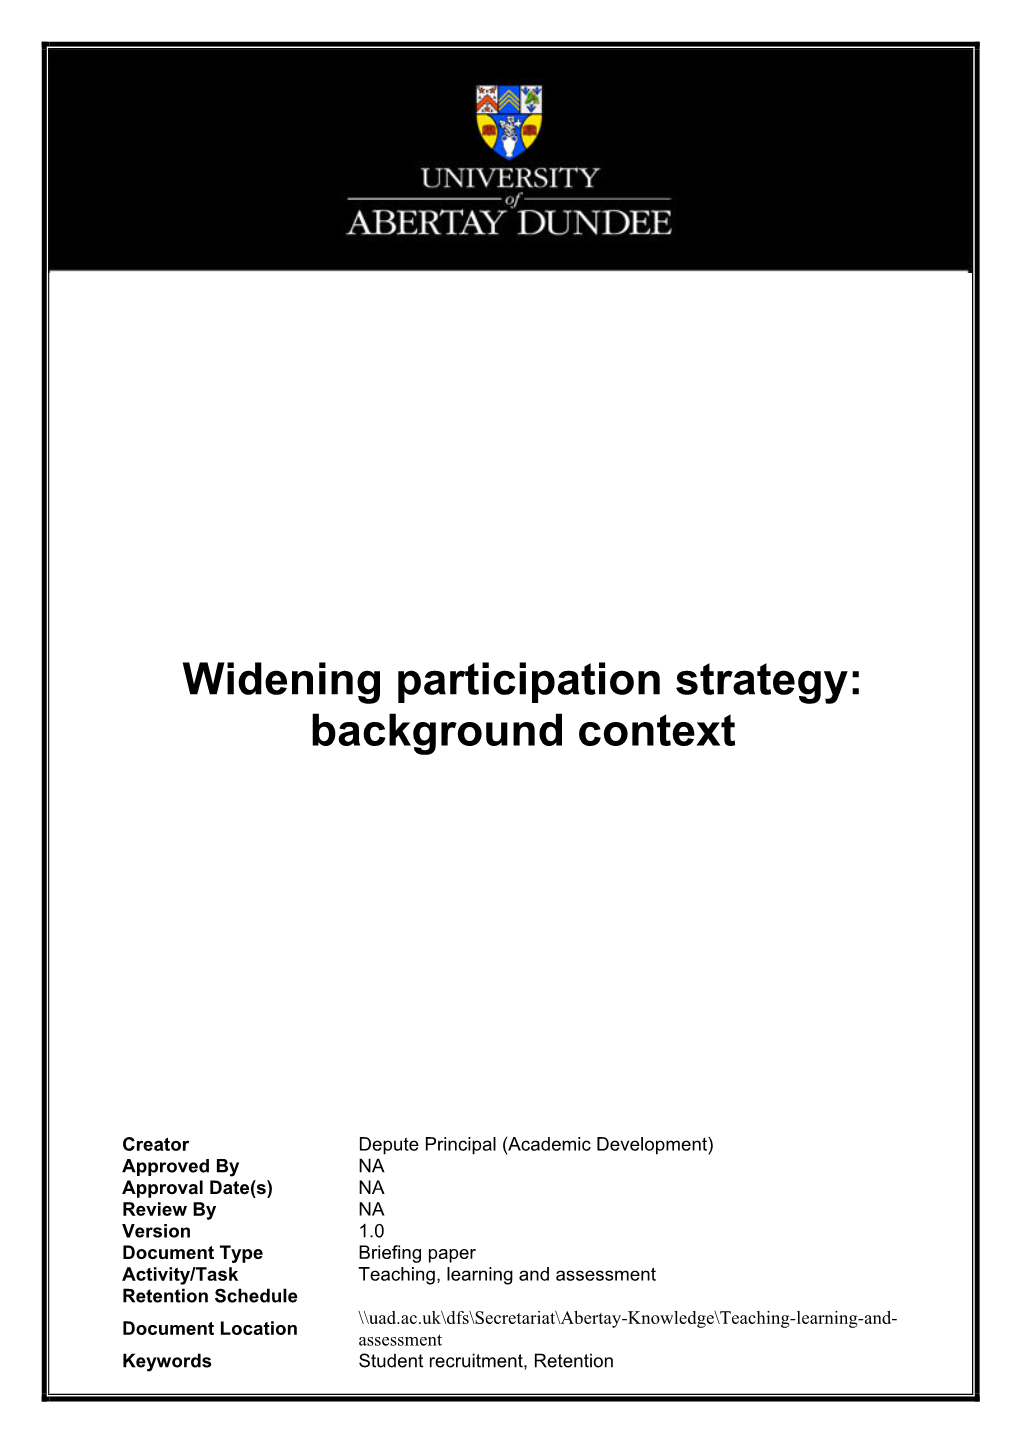 Widening Participation Strategy: Background Context